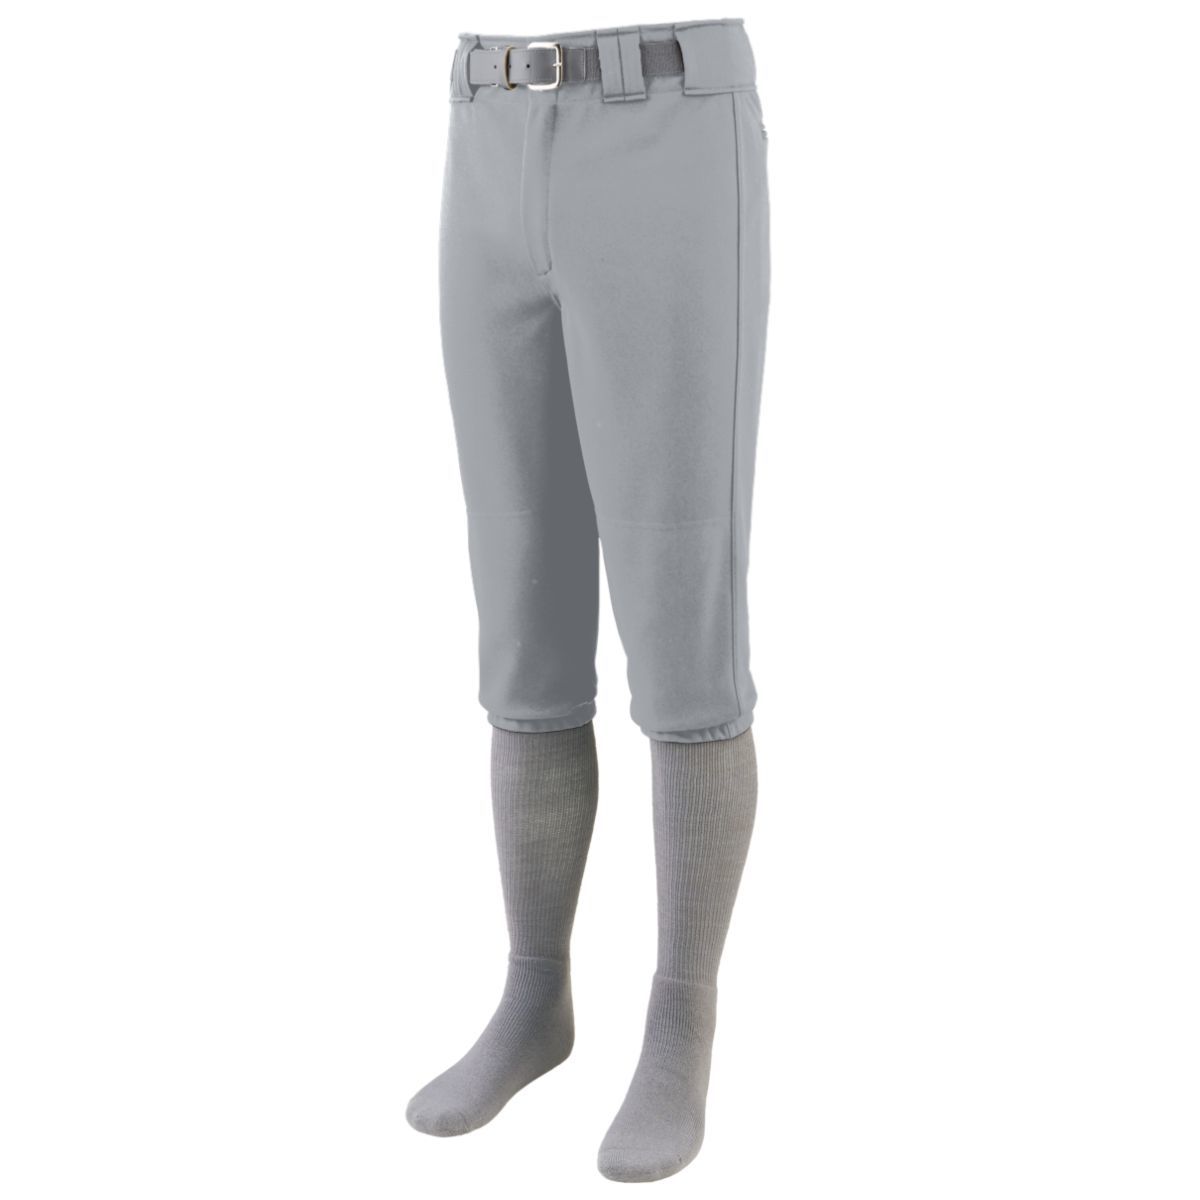 Augusta Sportswear Series Knee Length Baseball Pant in Silver Grey  -Part of the Adult, Adult-Pants, Pants, Augusta-Products, Baseball, All-Sports, All-Sports-1 product lines at KanaleyCreations.com